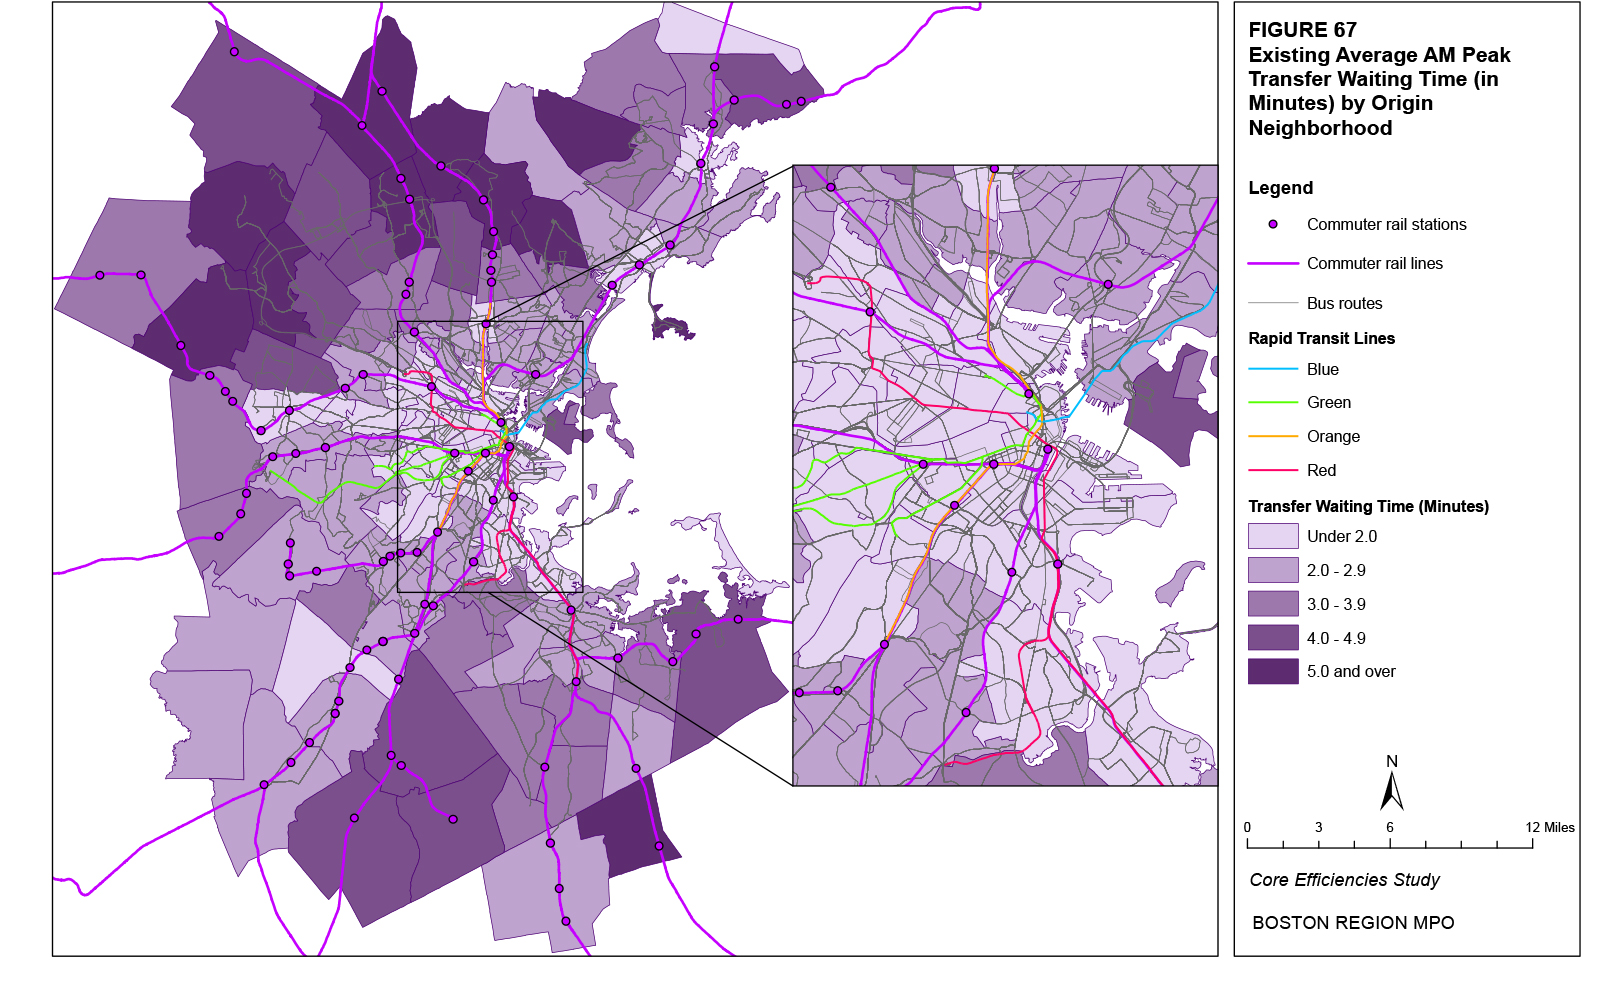 This map shows the existing average AM peak transfer waiting times for origin trips by neighborhood.